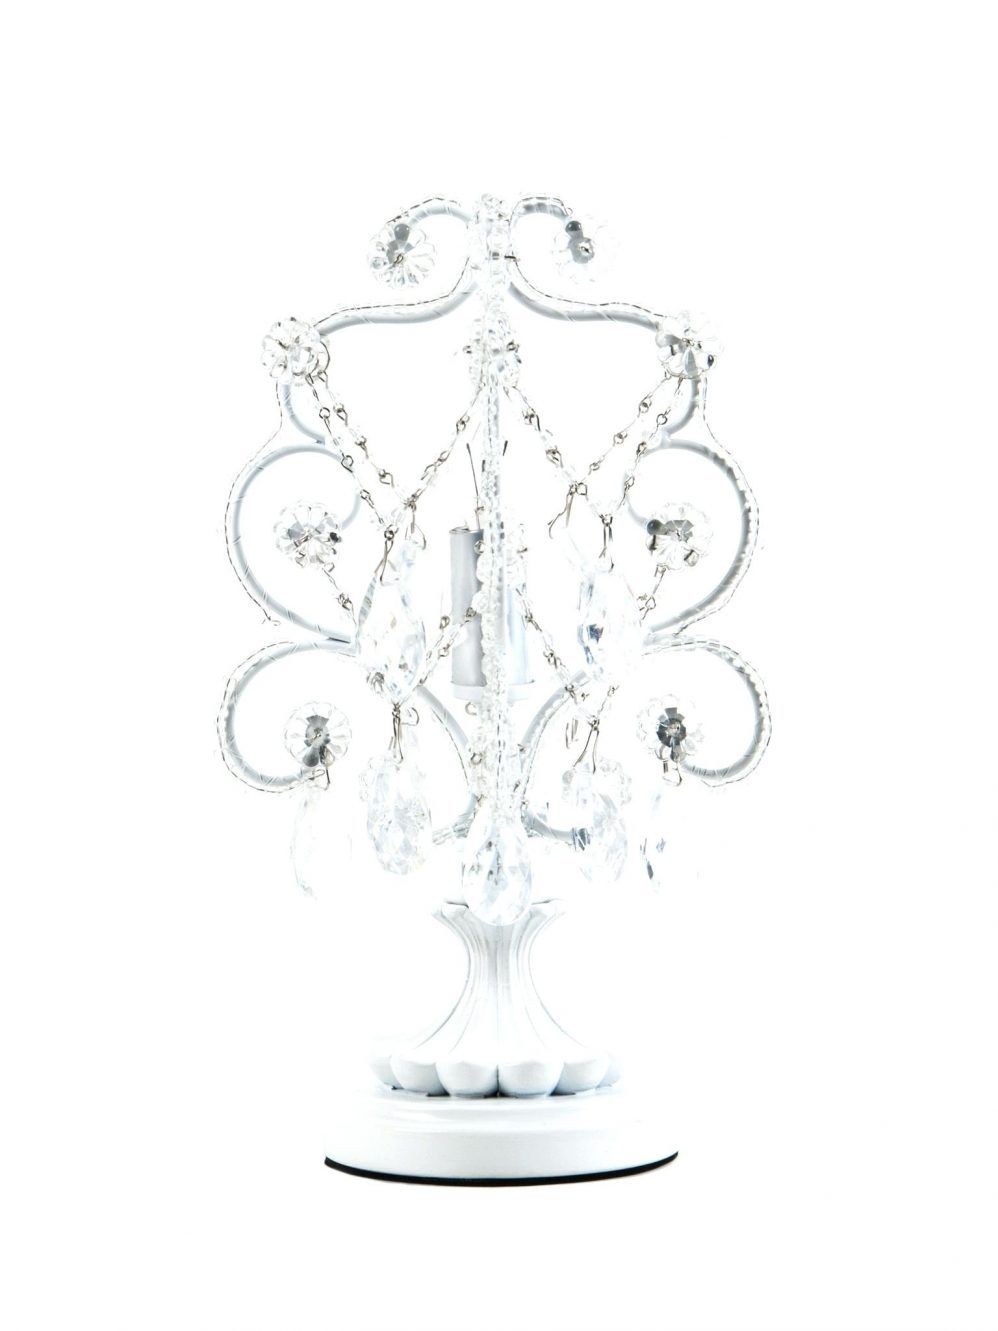 Chandelier Modern Dining Room Mini Chandelier Table Lamp Tea Light Inside Mini Chandelier Table Lamps (View 16 of 25)